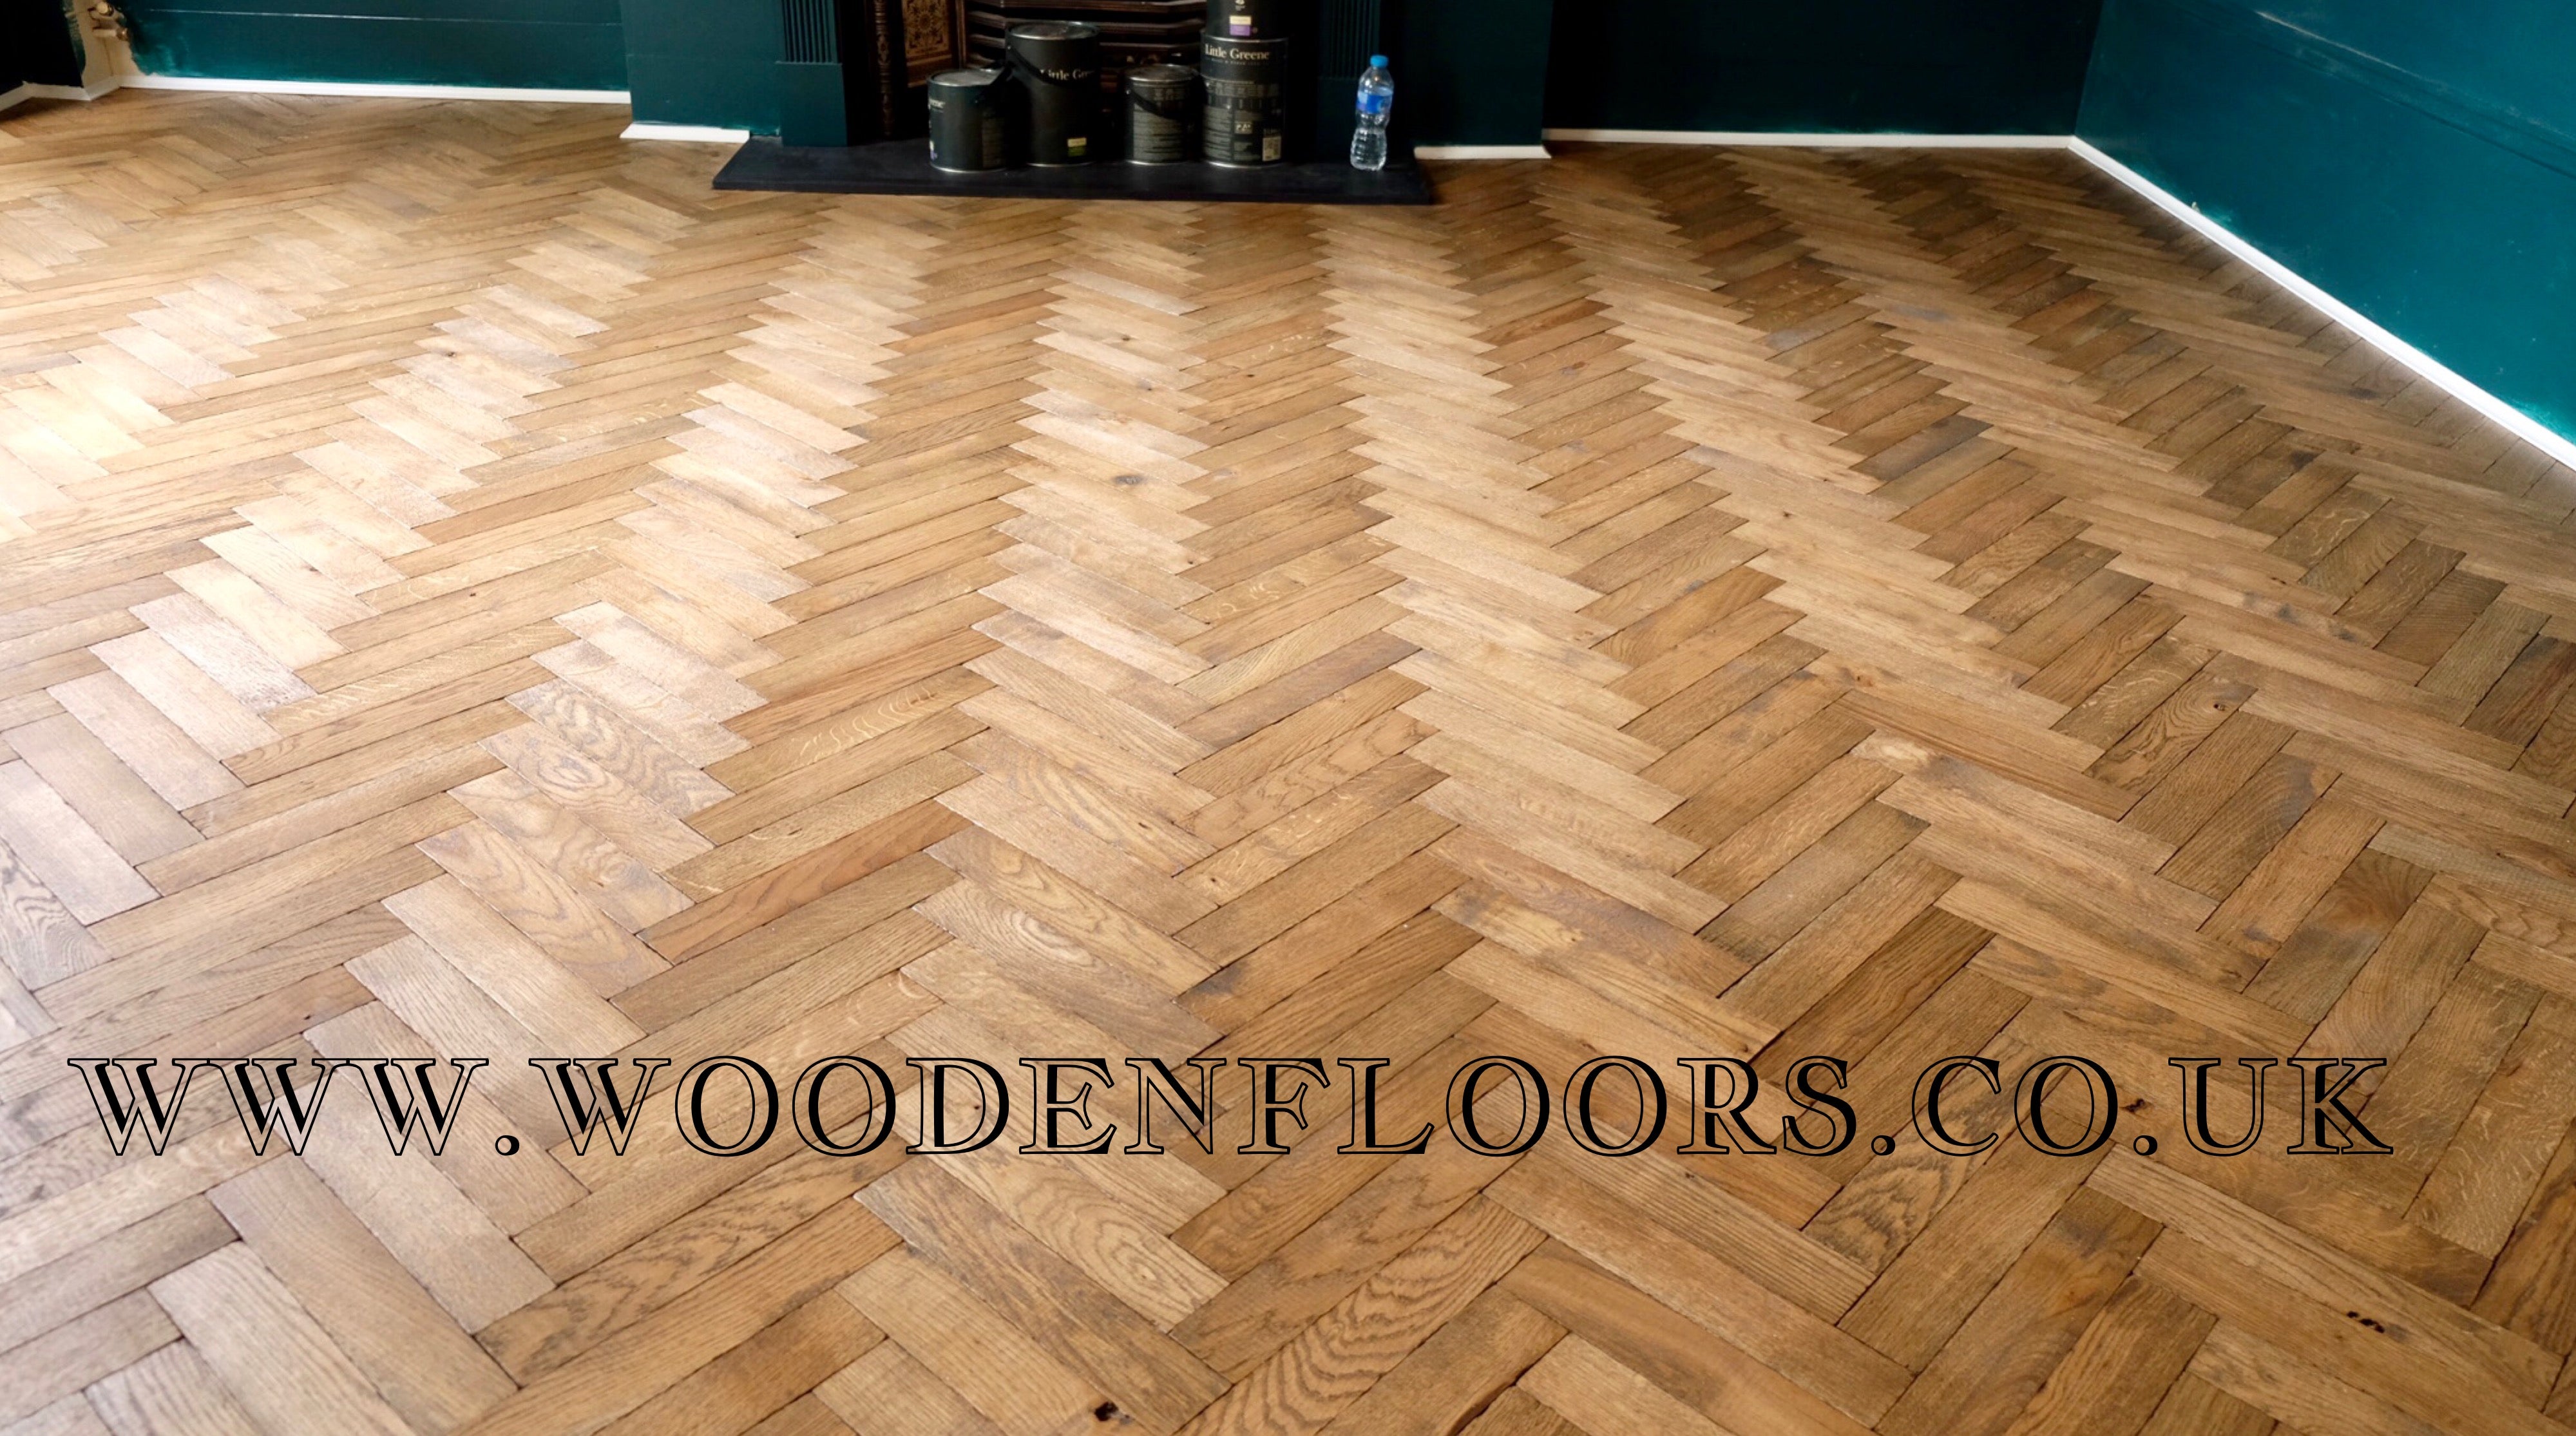 Solid oak parquet flooring Hand finished